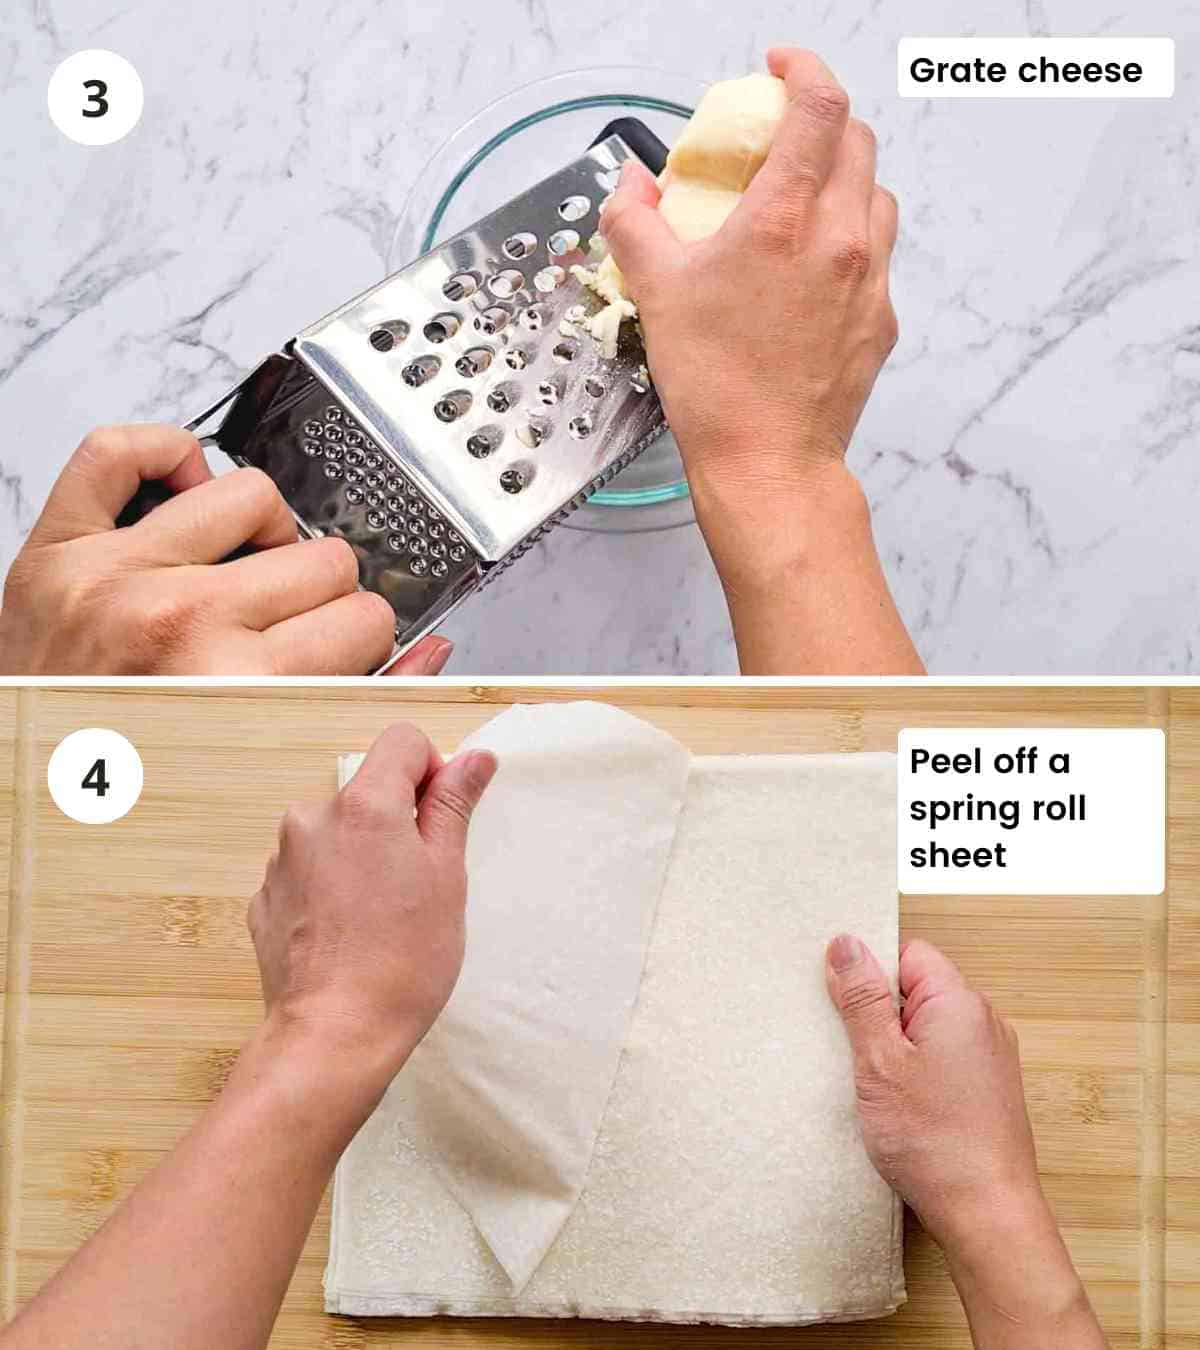 2 step collage of grating cheese and pulling apart spring roll sheets with captions